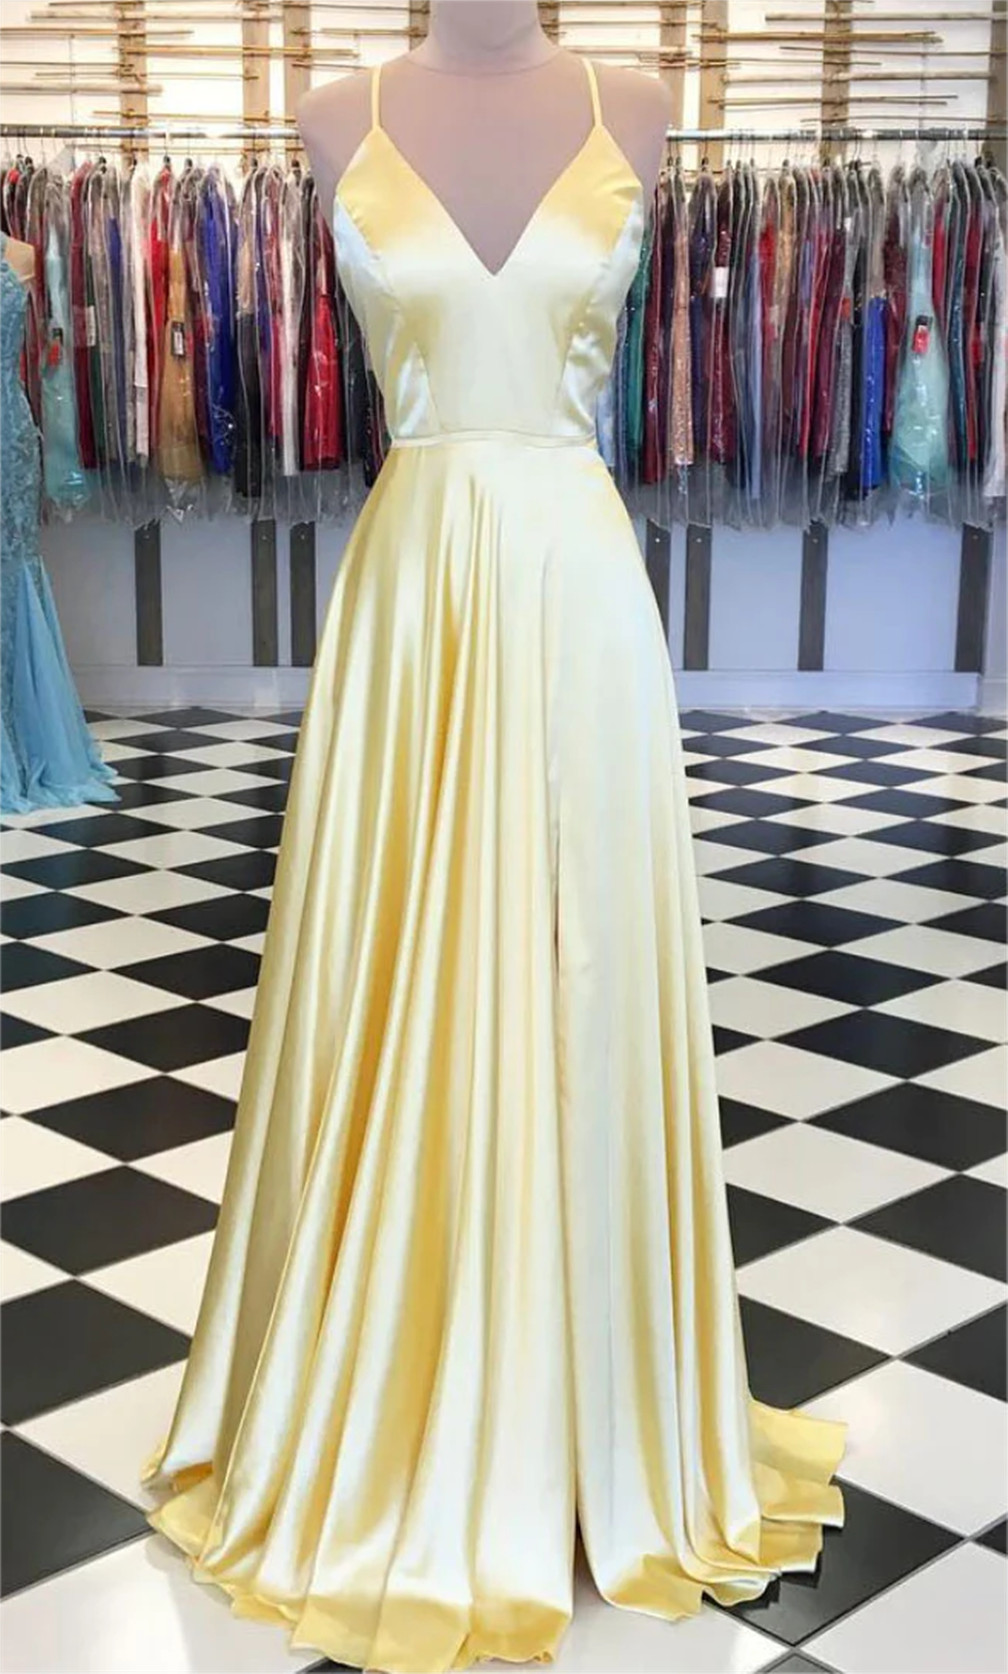 Women A-line Satin Prom Dresses Long V-neck Evening Party Gowns Sleeveless Formal Dress Yp117